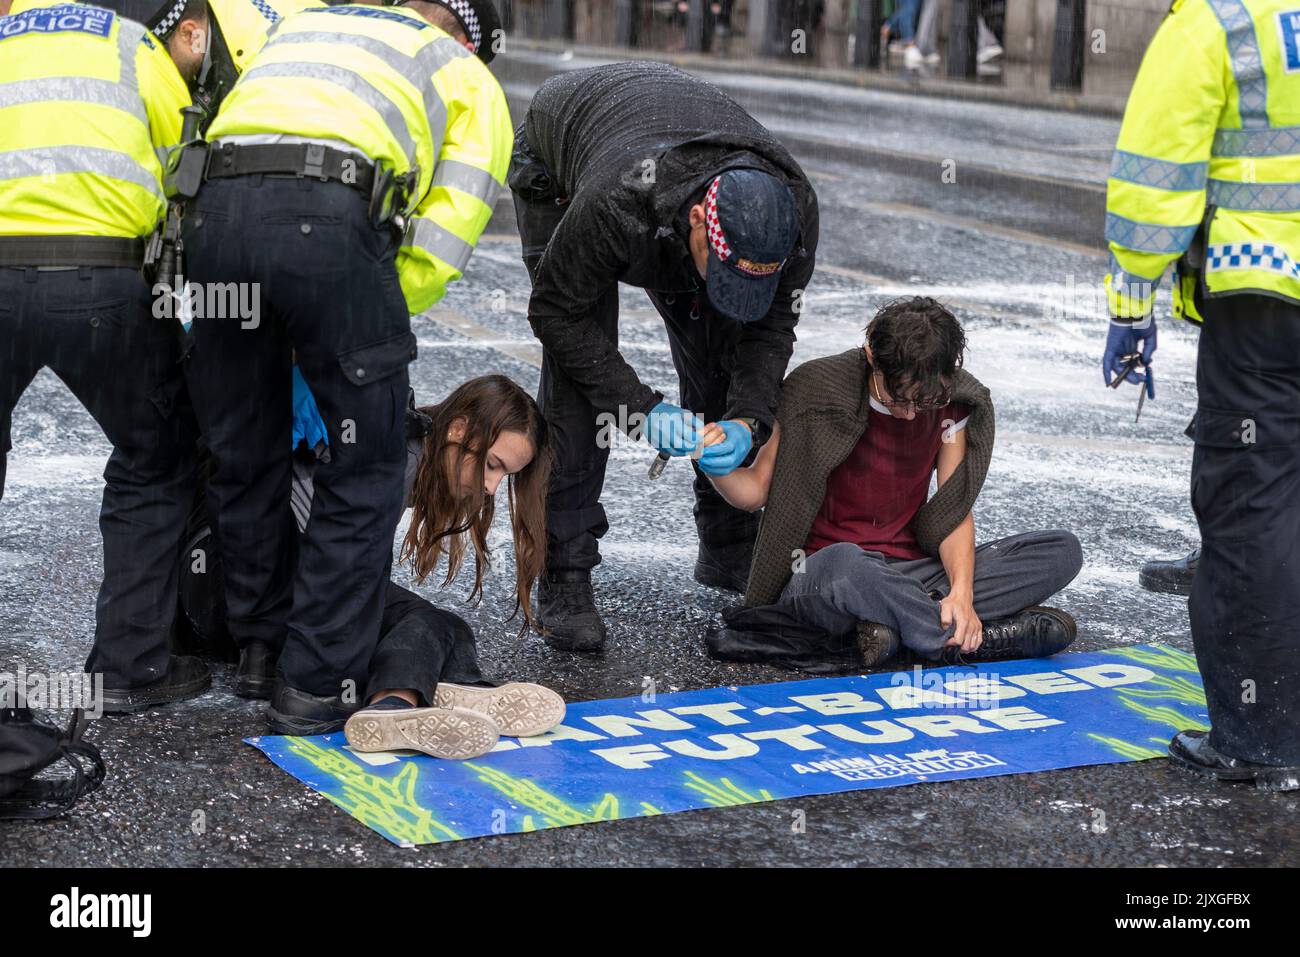 Westminster Bridge Road, Westminster, London, UK. 7th Sep, 2022. Vegan protesters from Animal Rebellion have sprayed white paint over a wall of the Palace of Westminster and blocked the Bridge Street road outside just prior to new Prime Minister Liz Truss arriving at Parliament for PMQs. Arrests were made. Anti-milk protest. Heavy rain shortly after has washed much of the paint across pavements and into the road Stock Photo